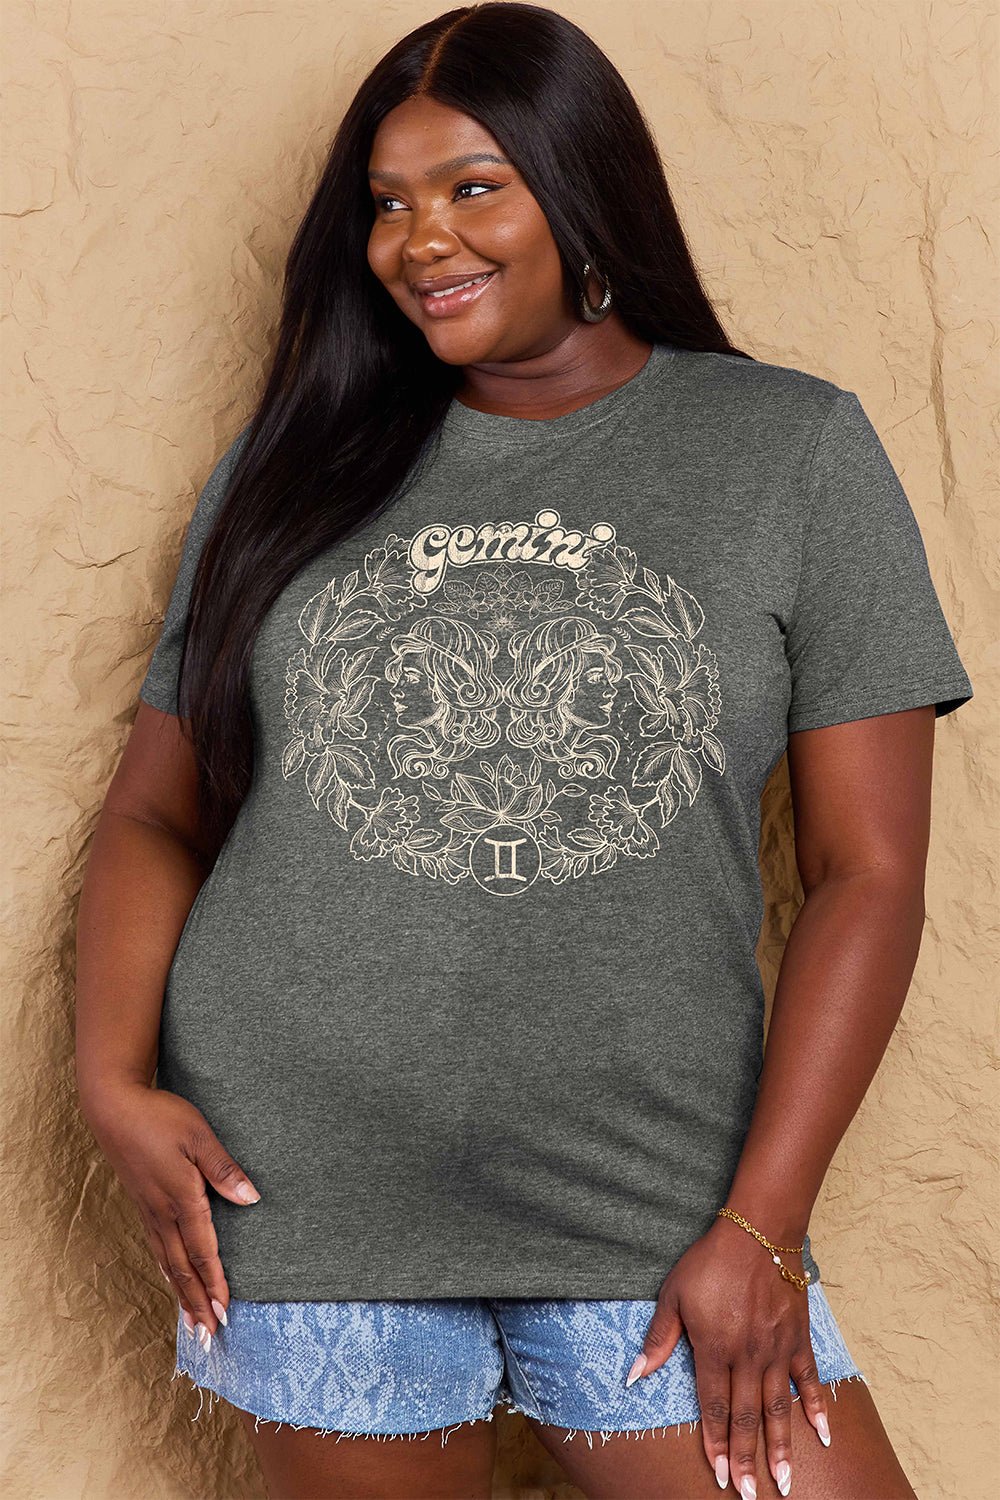 Simply Love Full Size GEMINI Graphic T-Shirt - GemThreads Boutique